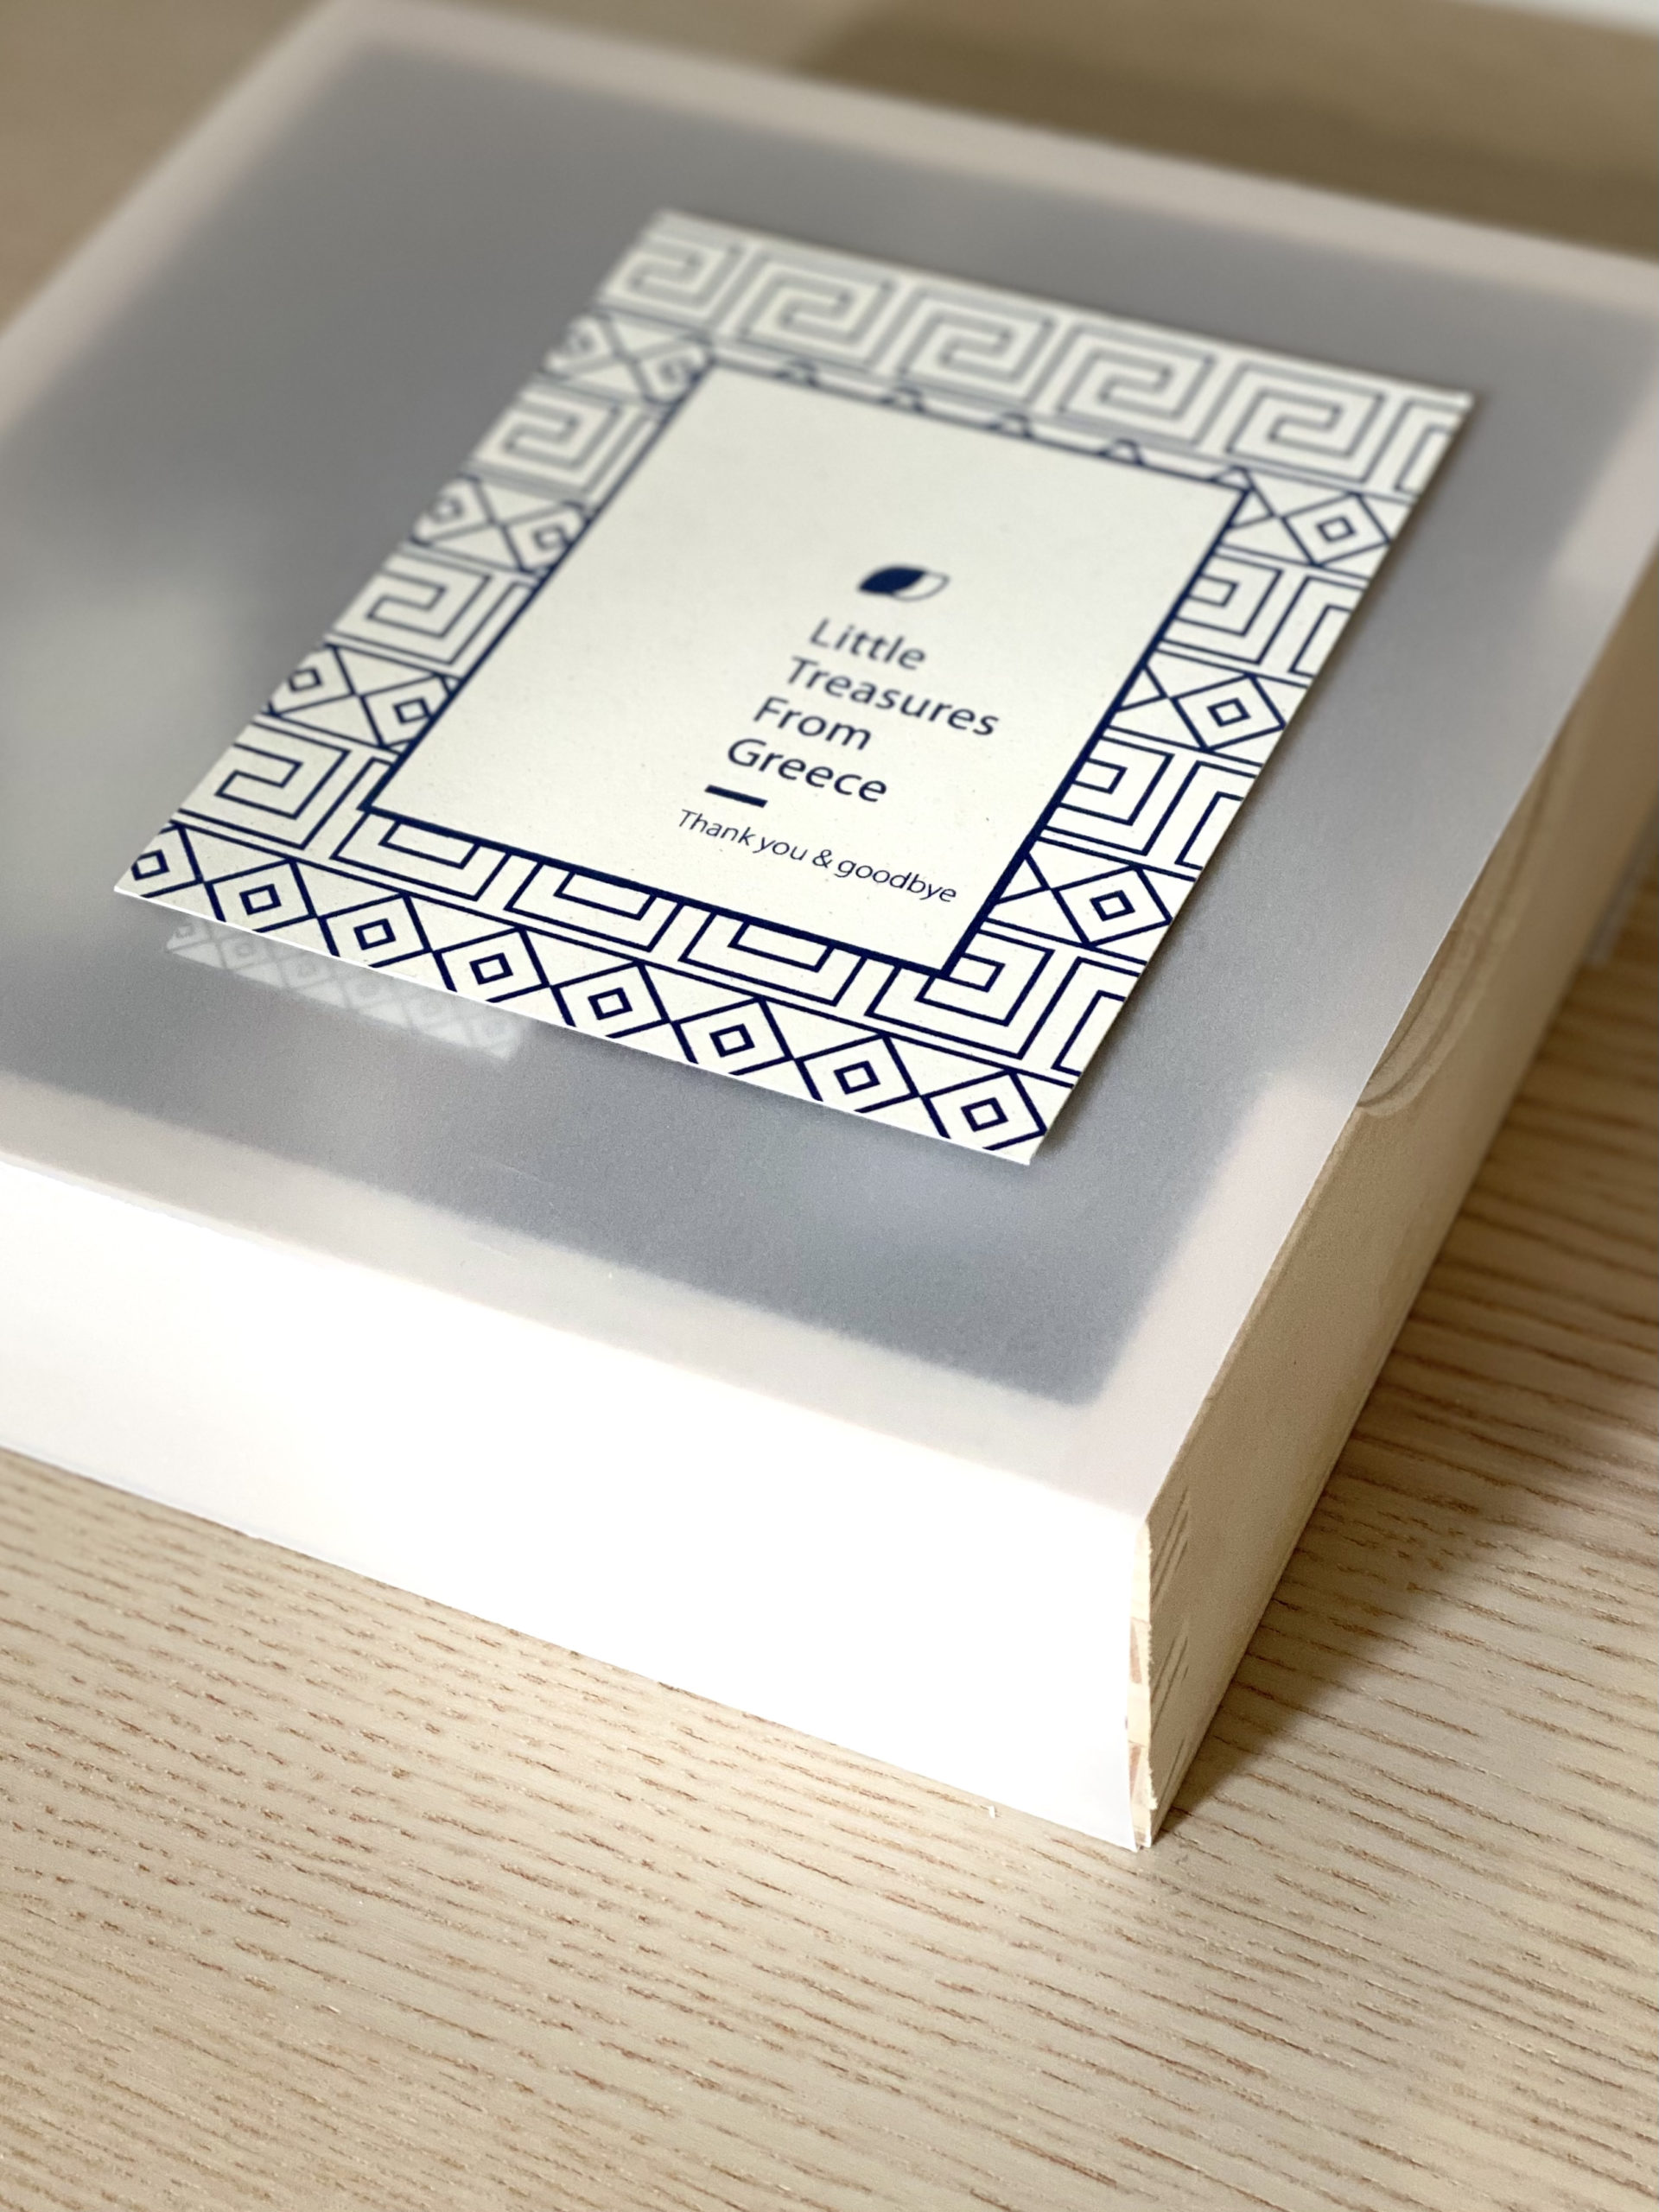 little-treasures-from-greece-wedding-welcome-gift-box-label-packaging